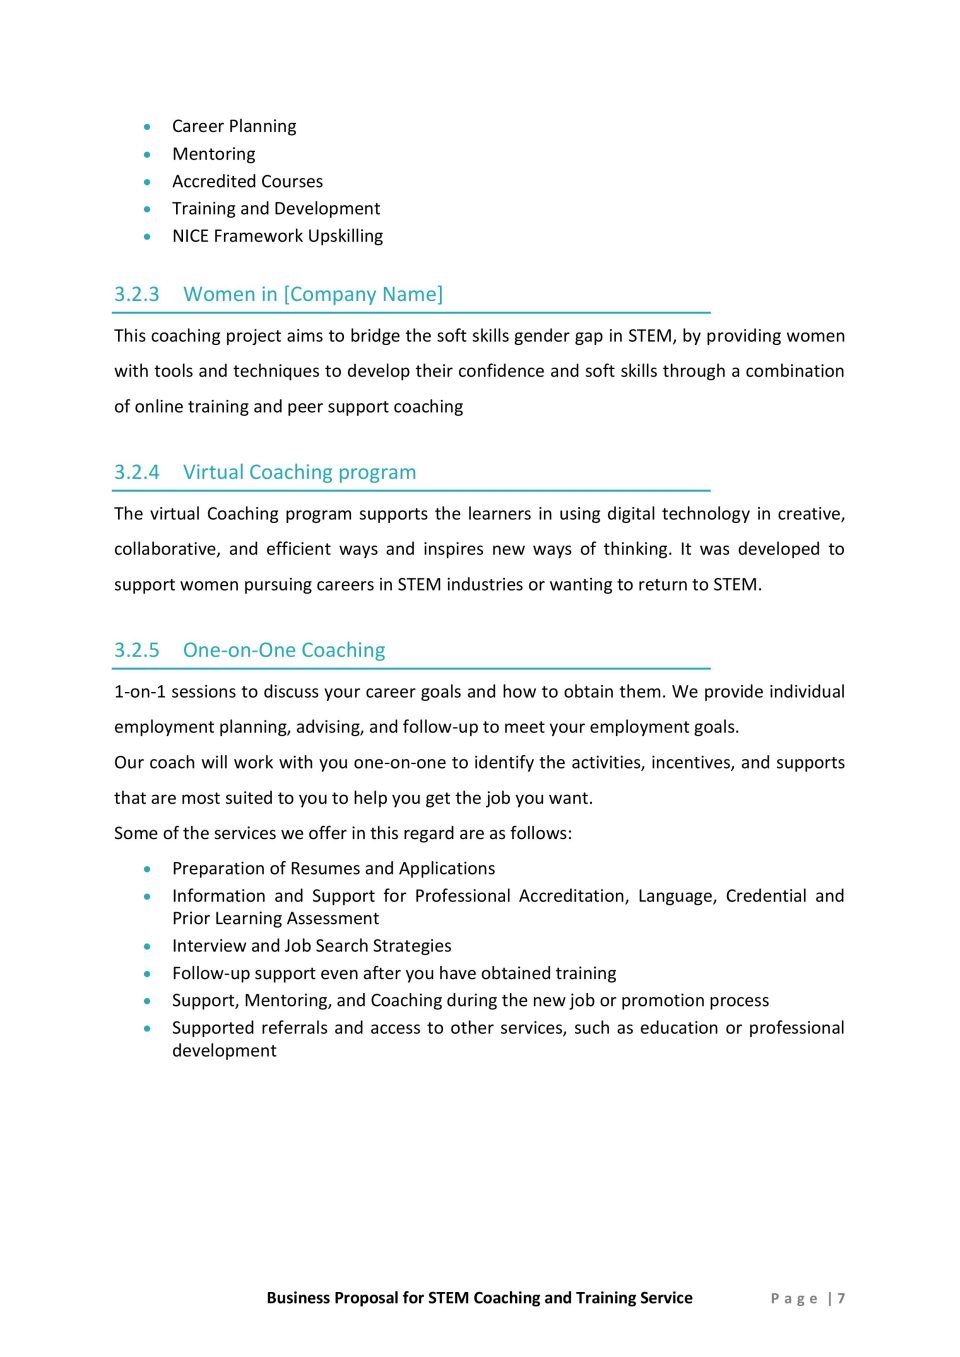 STEM Coaching and Training Service Proposal Template 07 scaled